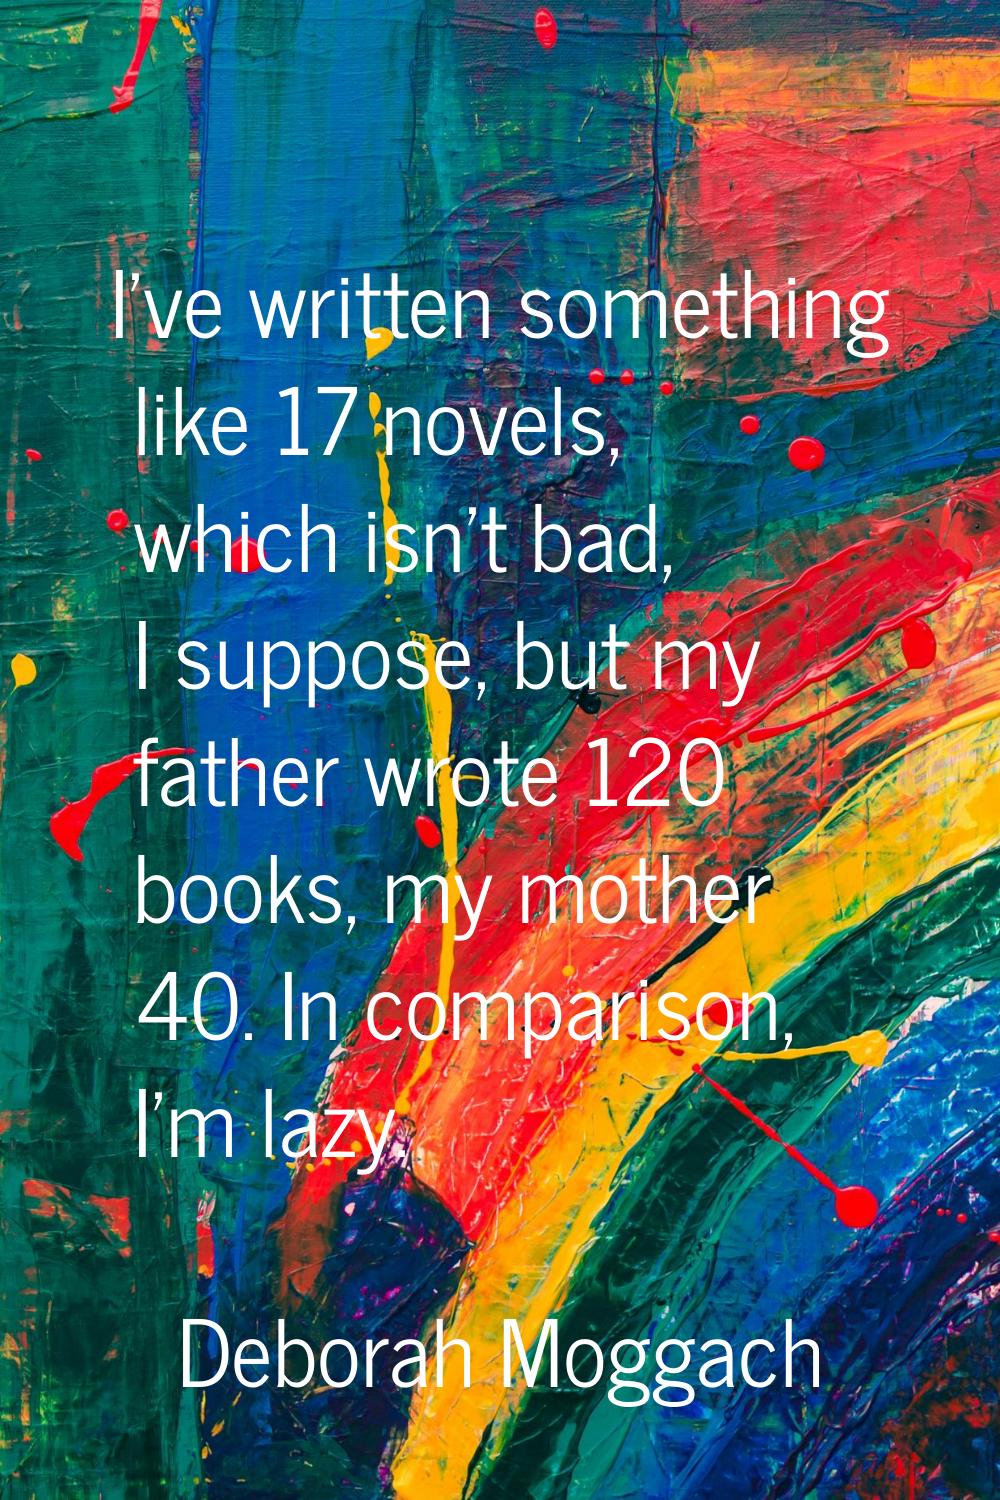 I've written something like 17 novels, which isn't bad, I suppose, but my father wrote 120 books, m